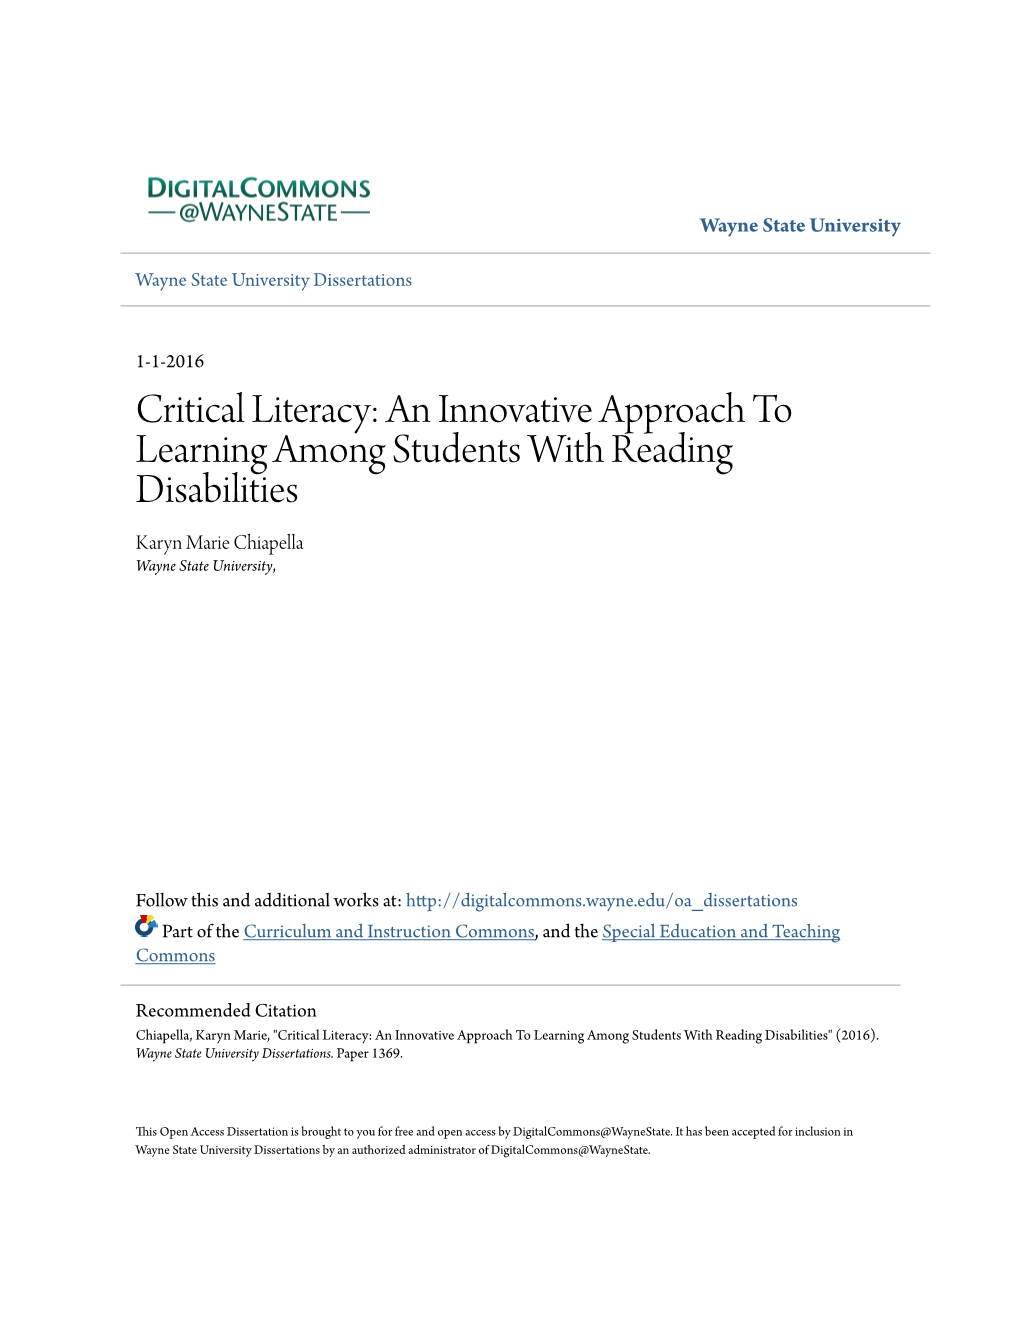 Critical Literacy: an Innovative Approach to Learning Among Students with Reading Disabilities Karyn Marie Chiapella Wayne State University